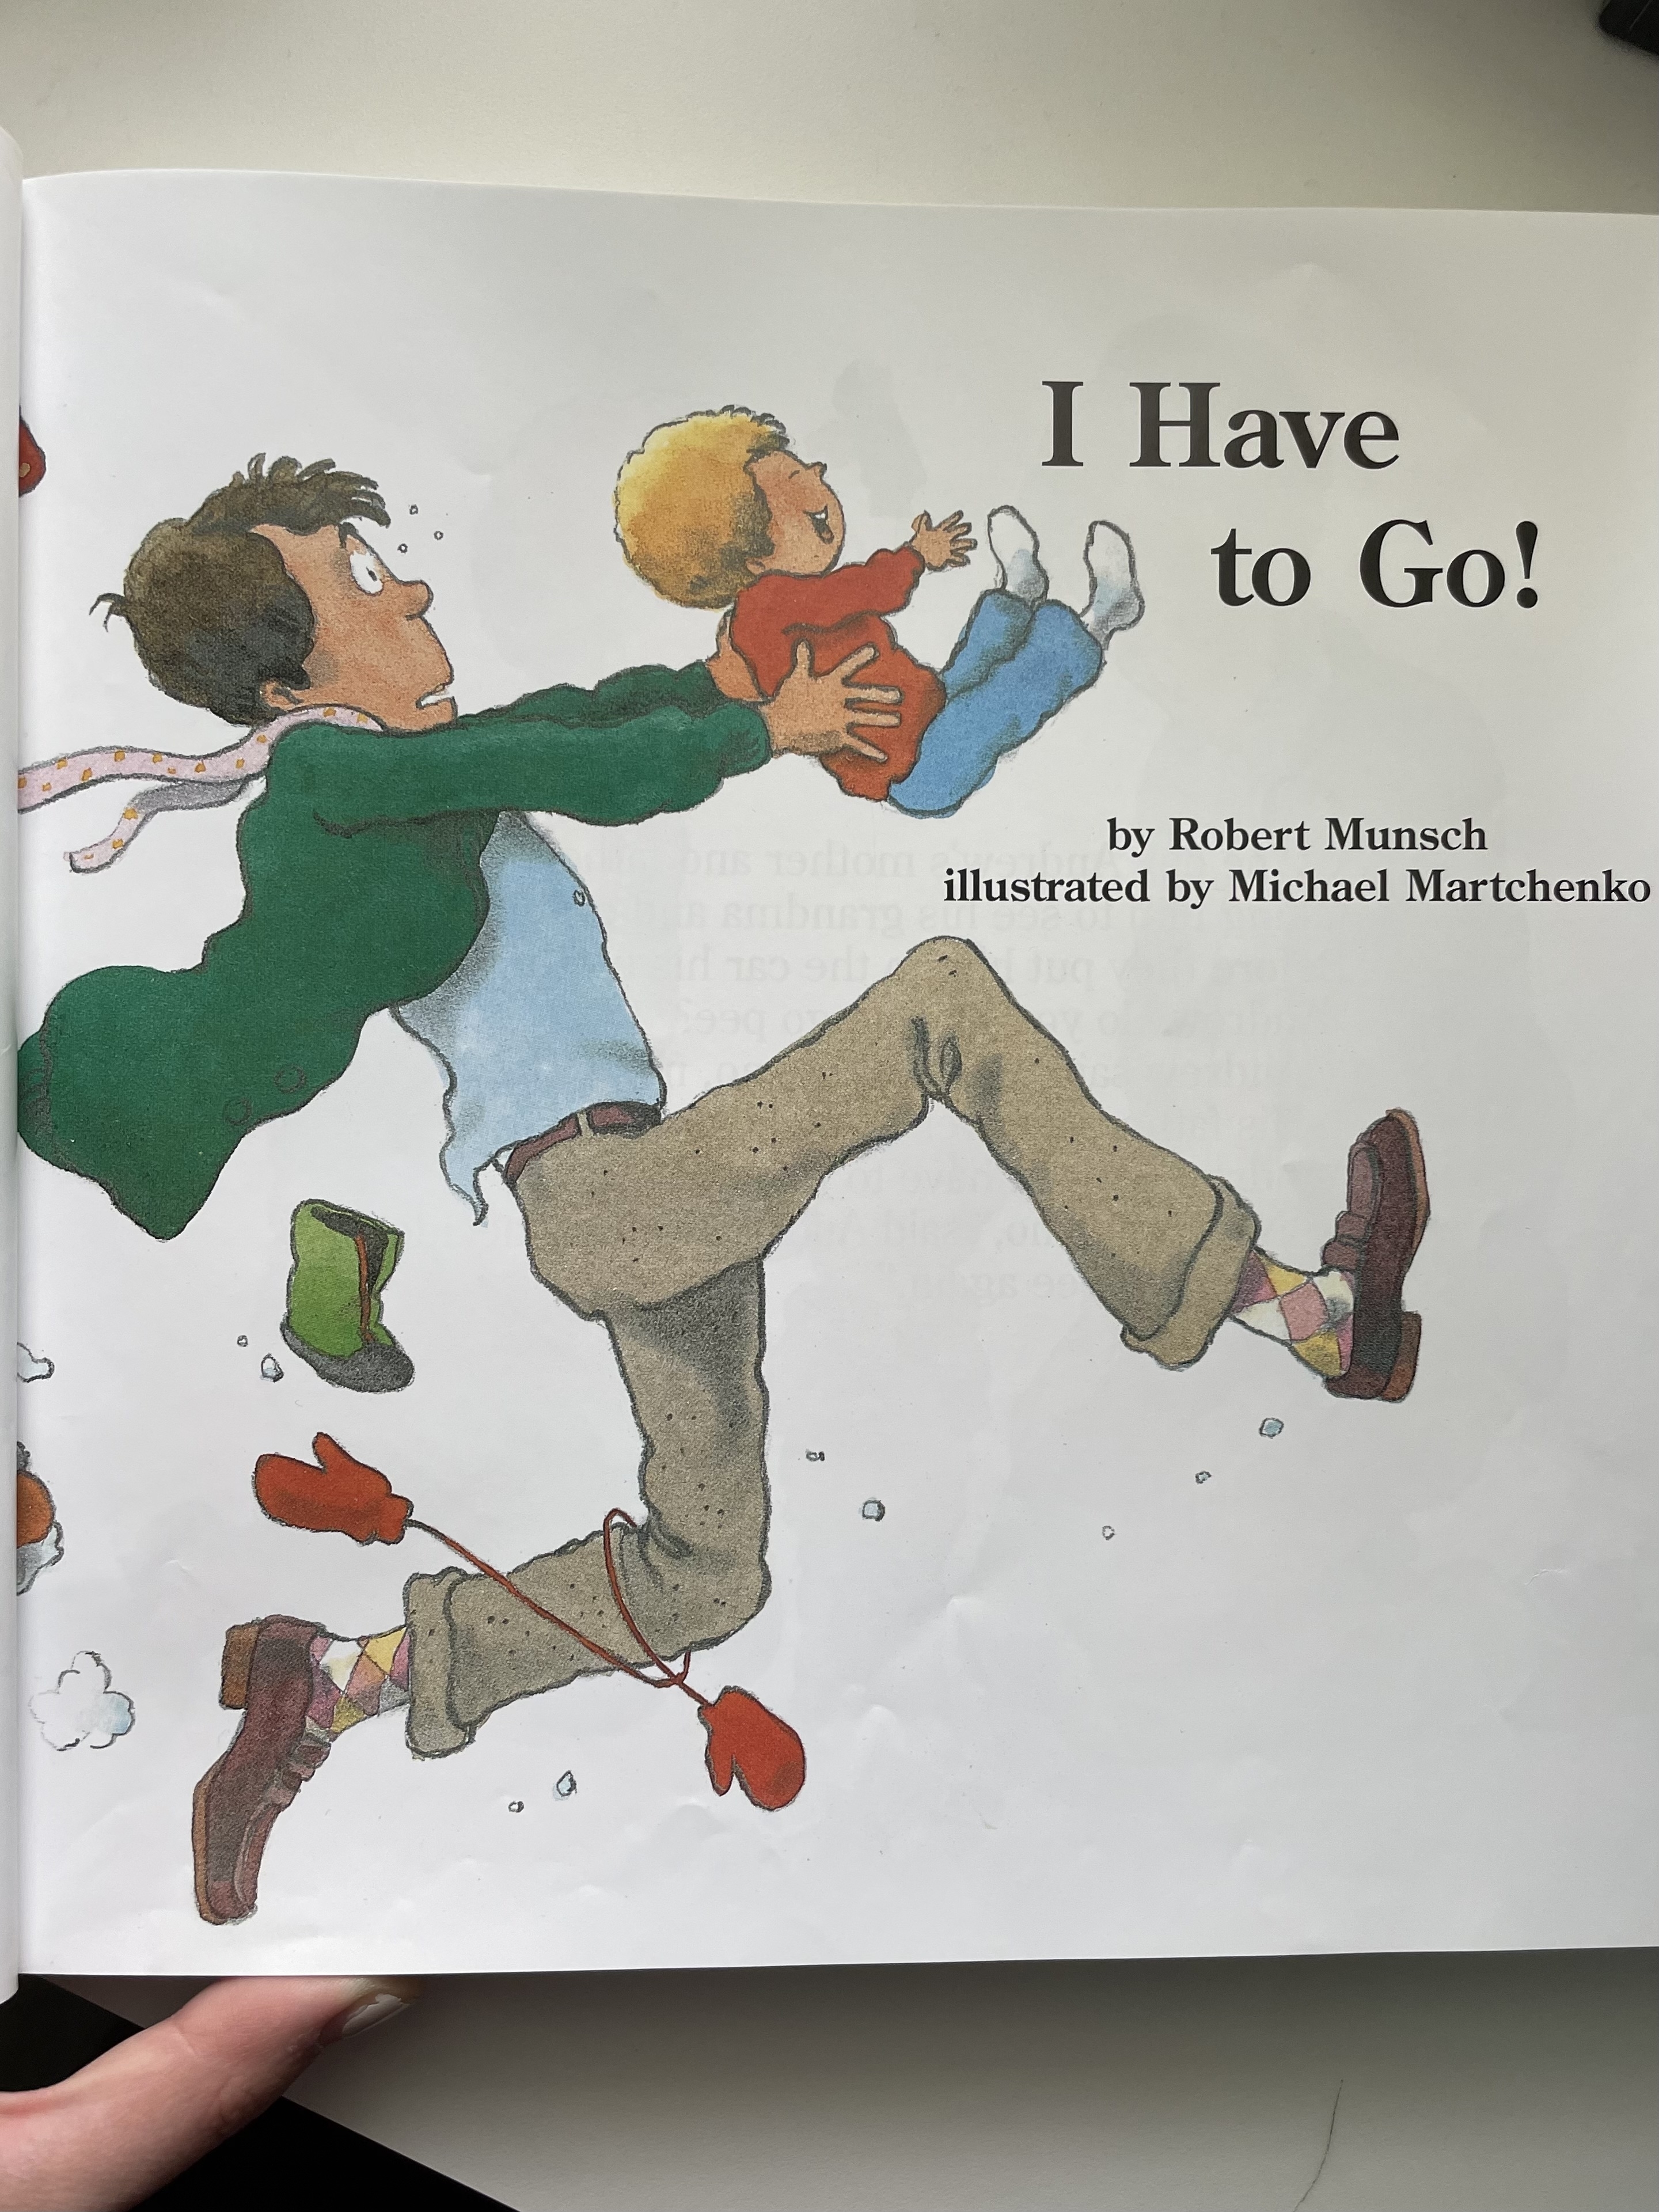 Open book showing illustrated page with title &quot;I Have to Go!&quot; and text &quot;illustrated by Michael Martchenko&quot; with two children characters